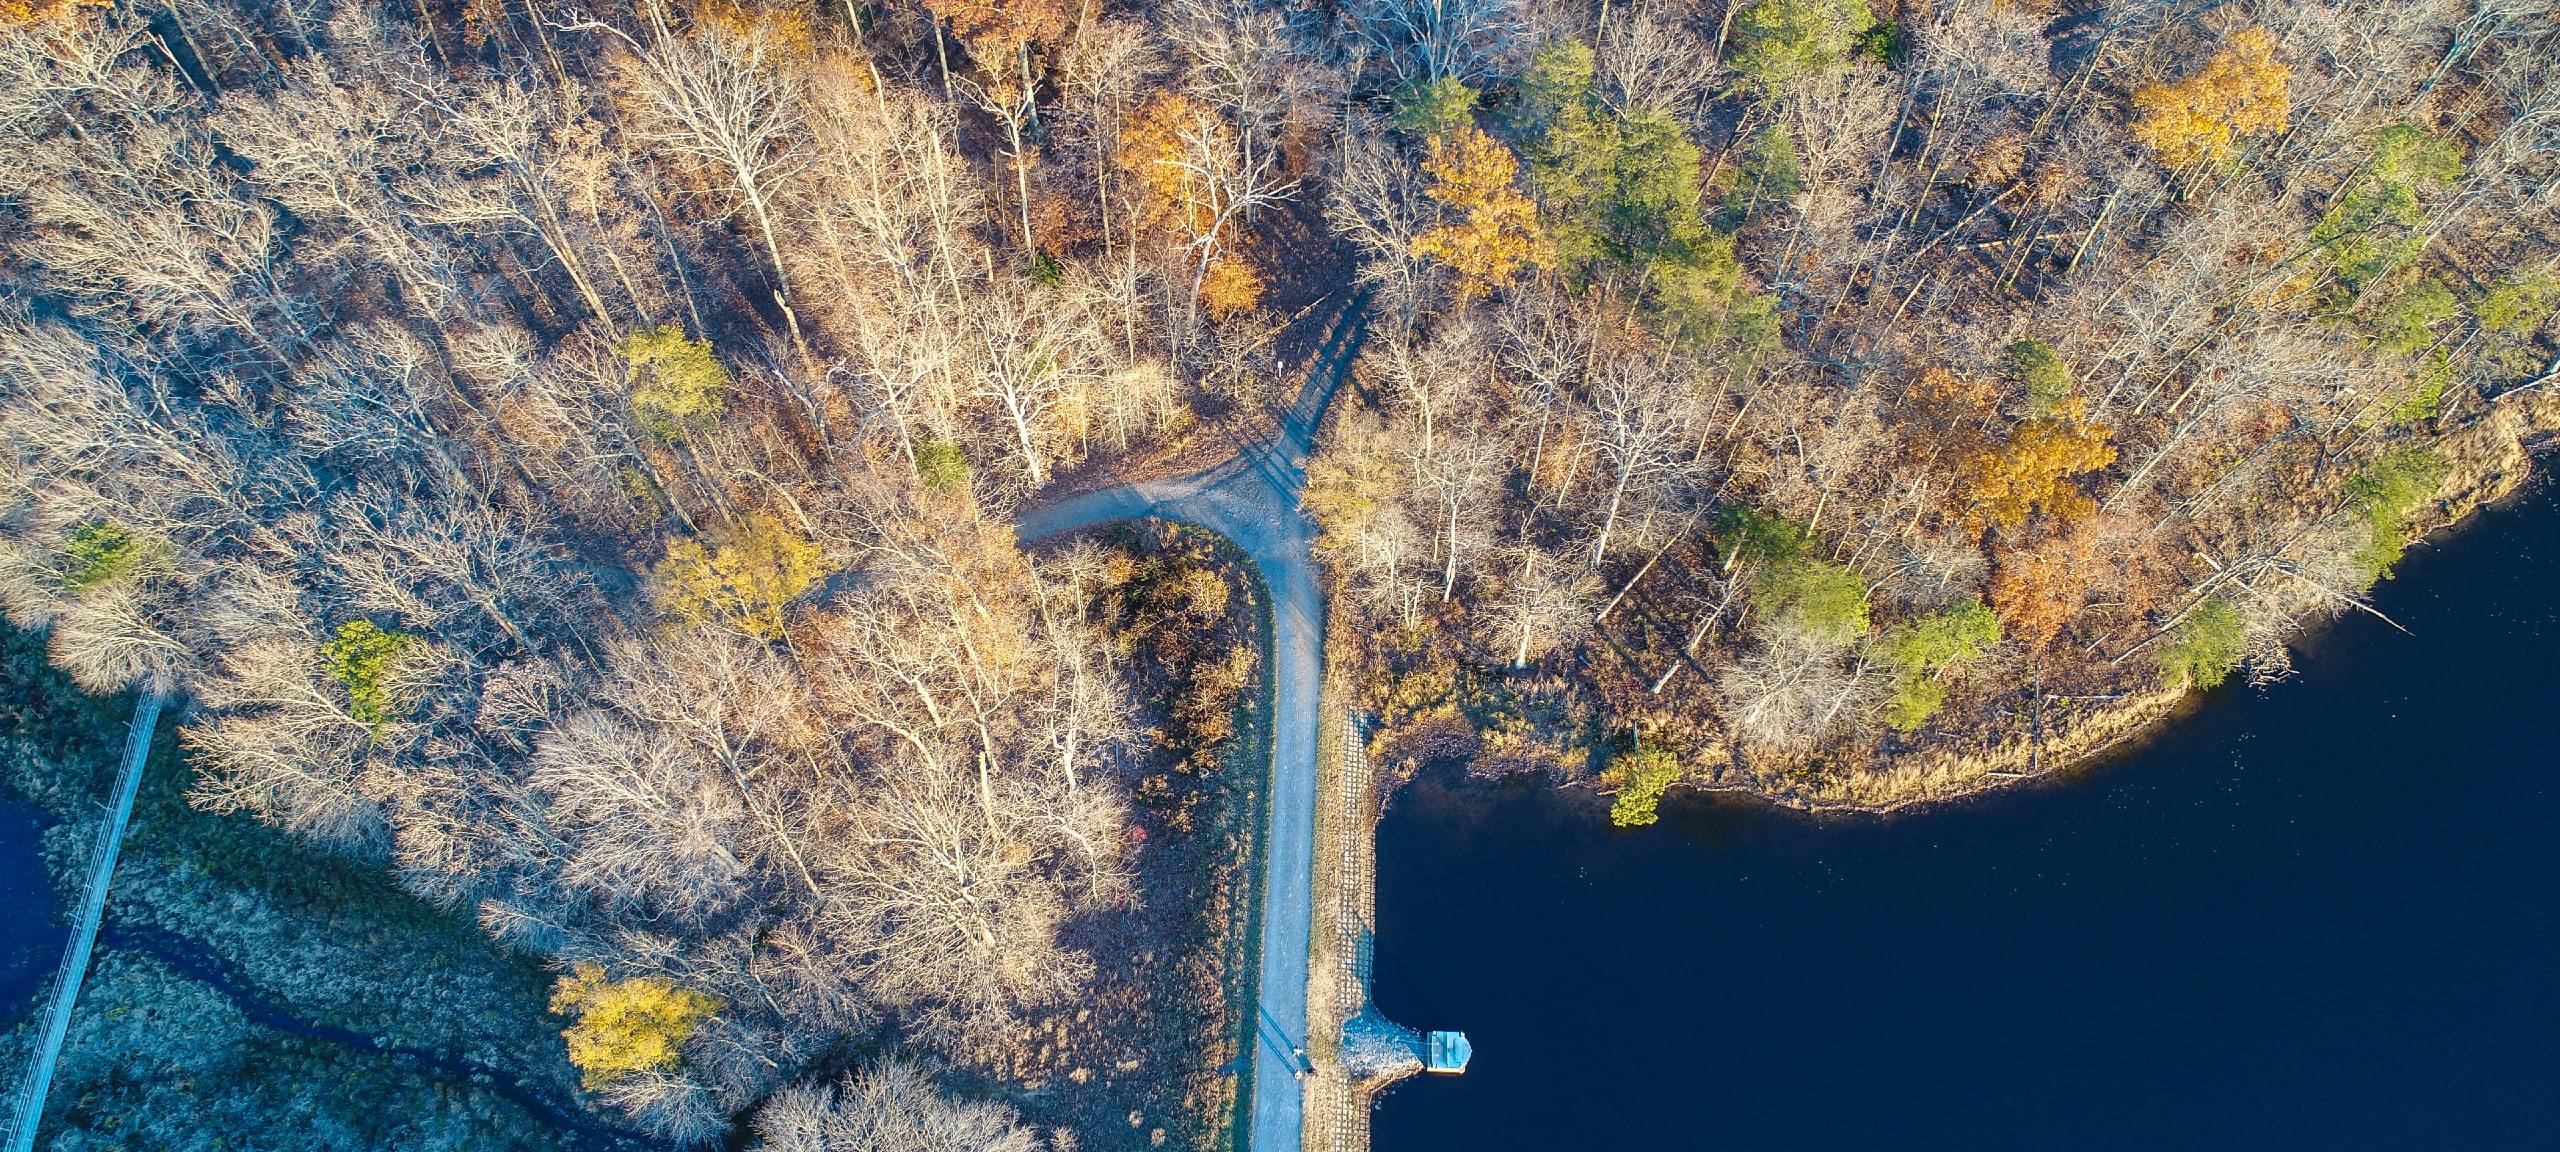 Aerial view of Patuxent Research Refuge, north of Bowie, MD